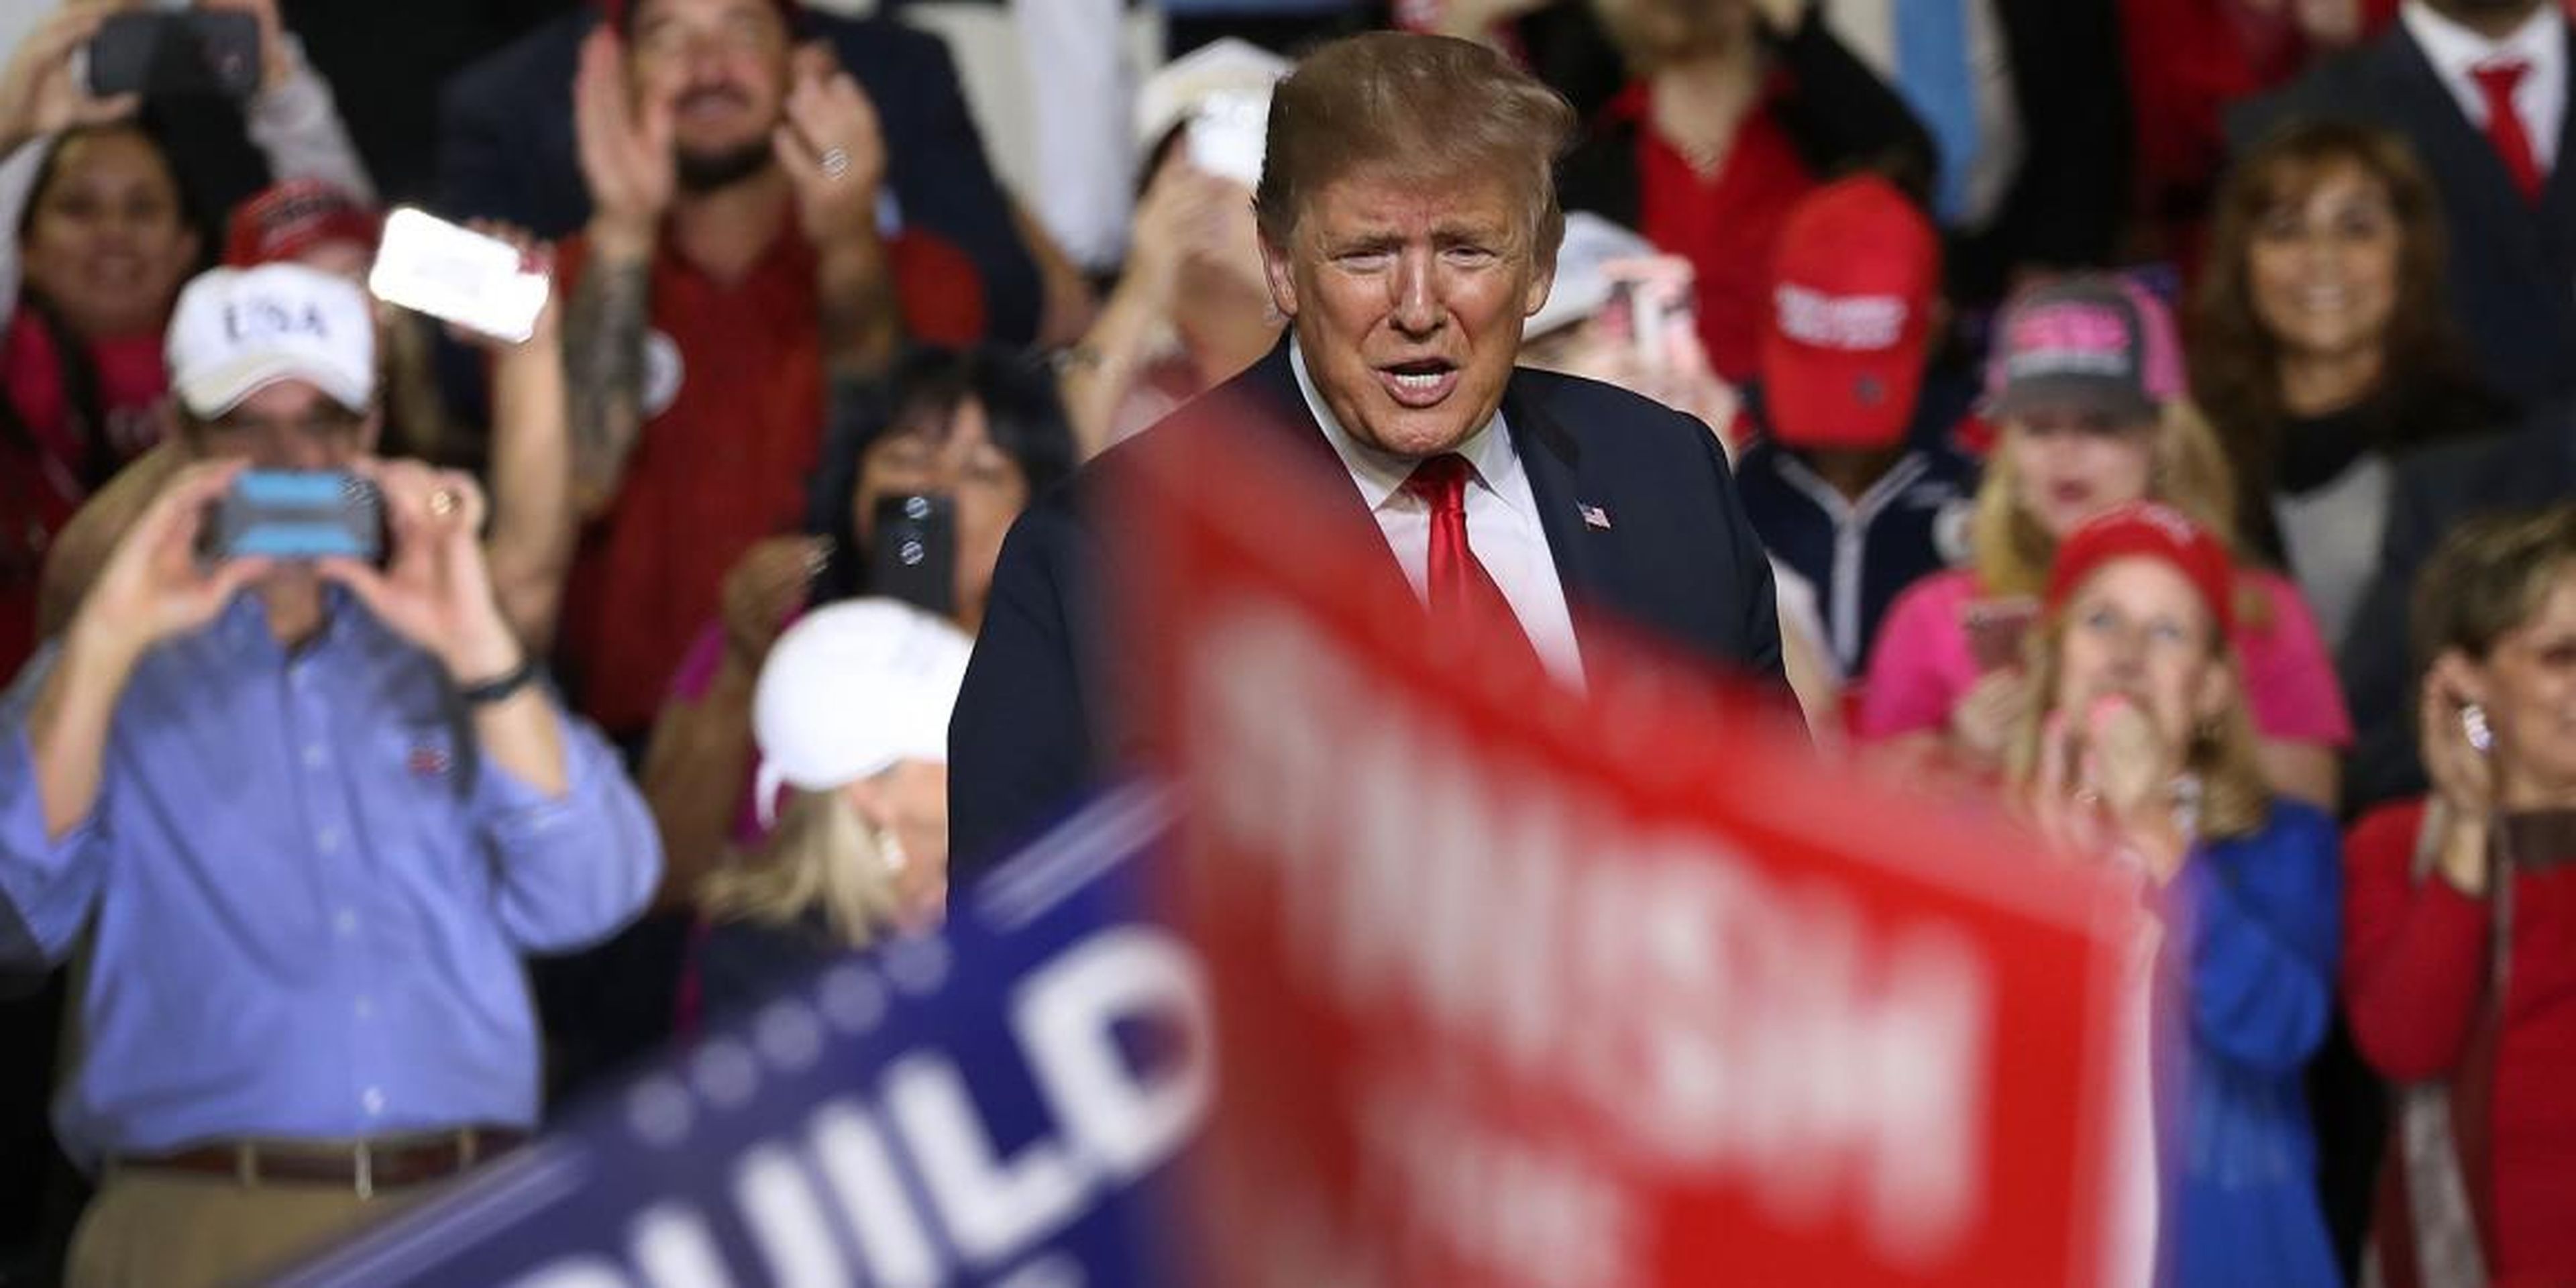 Trump at a rally in El Paso, Texas, in February. A border wall has been a key talking point for him and his supporters.